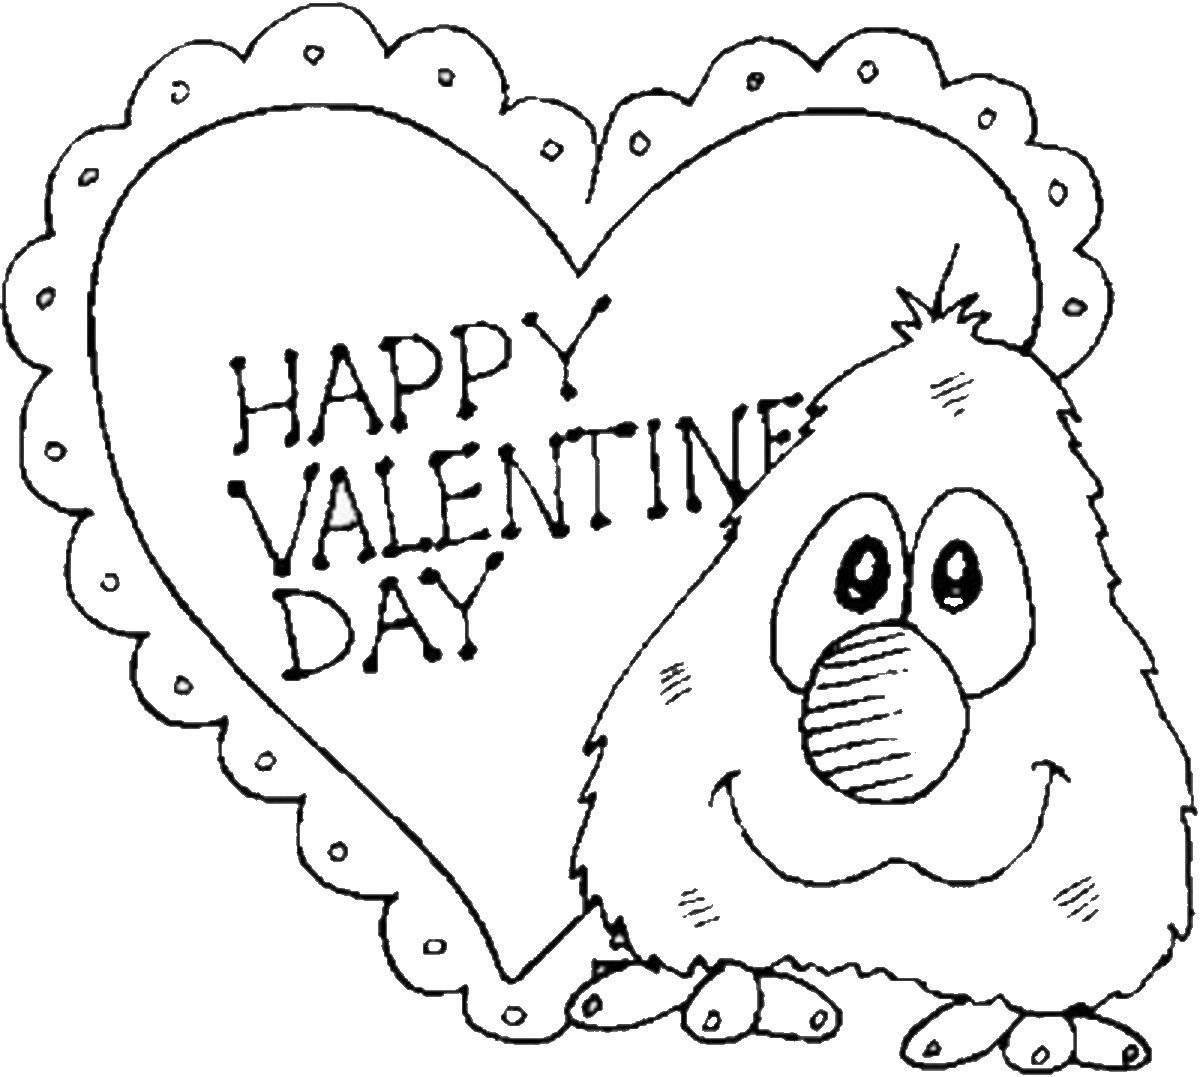 Colorful valentine coloring pages for valentine's day for kids